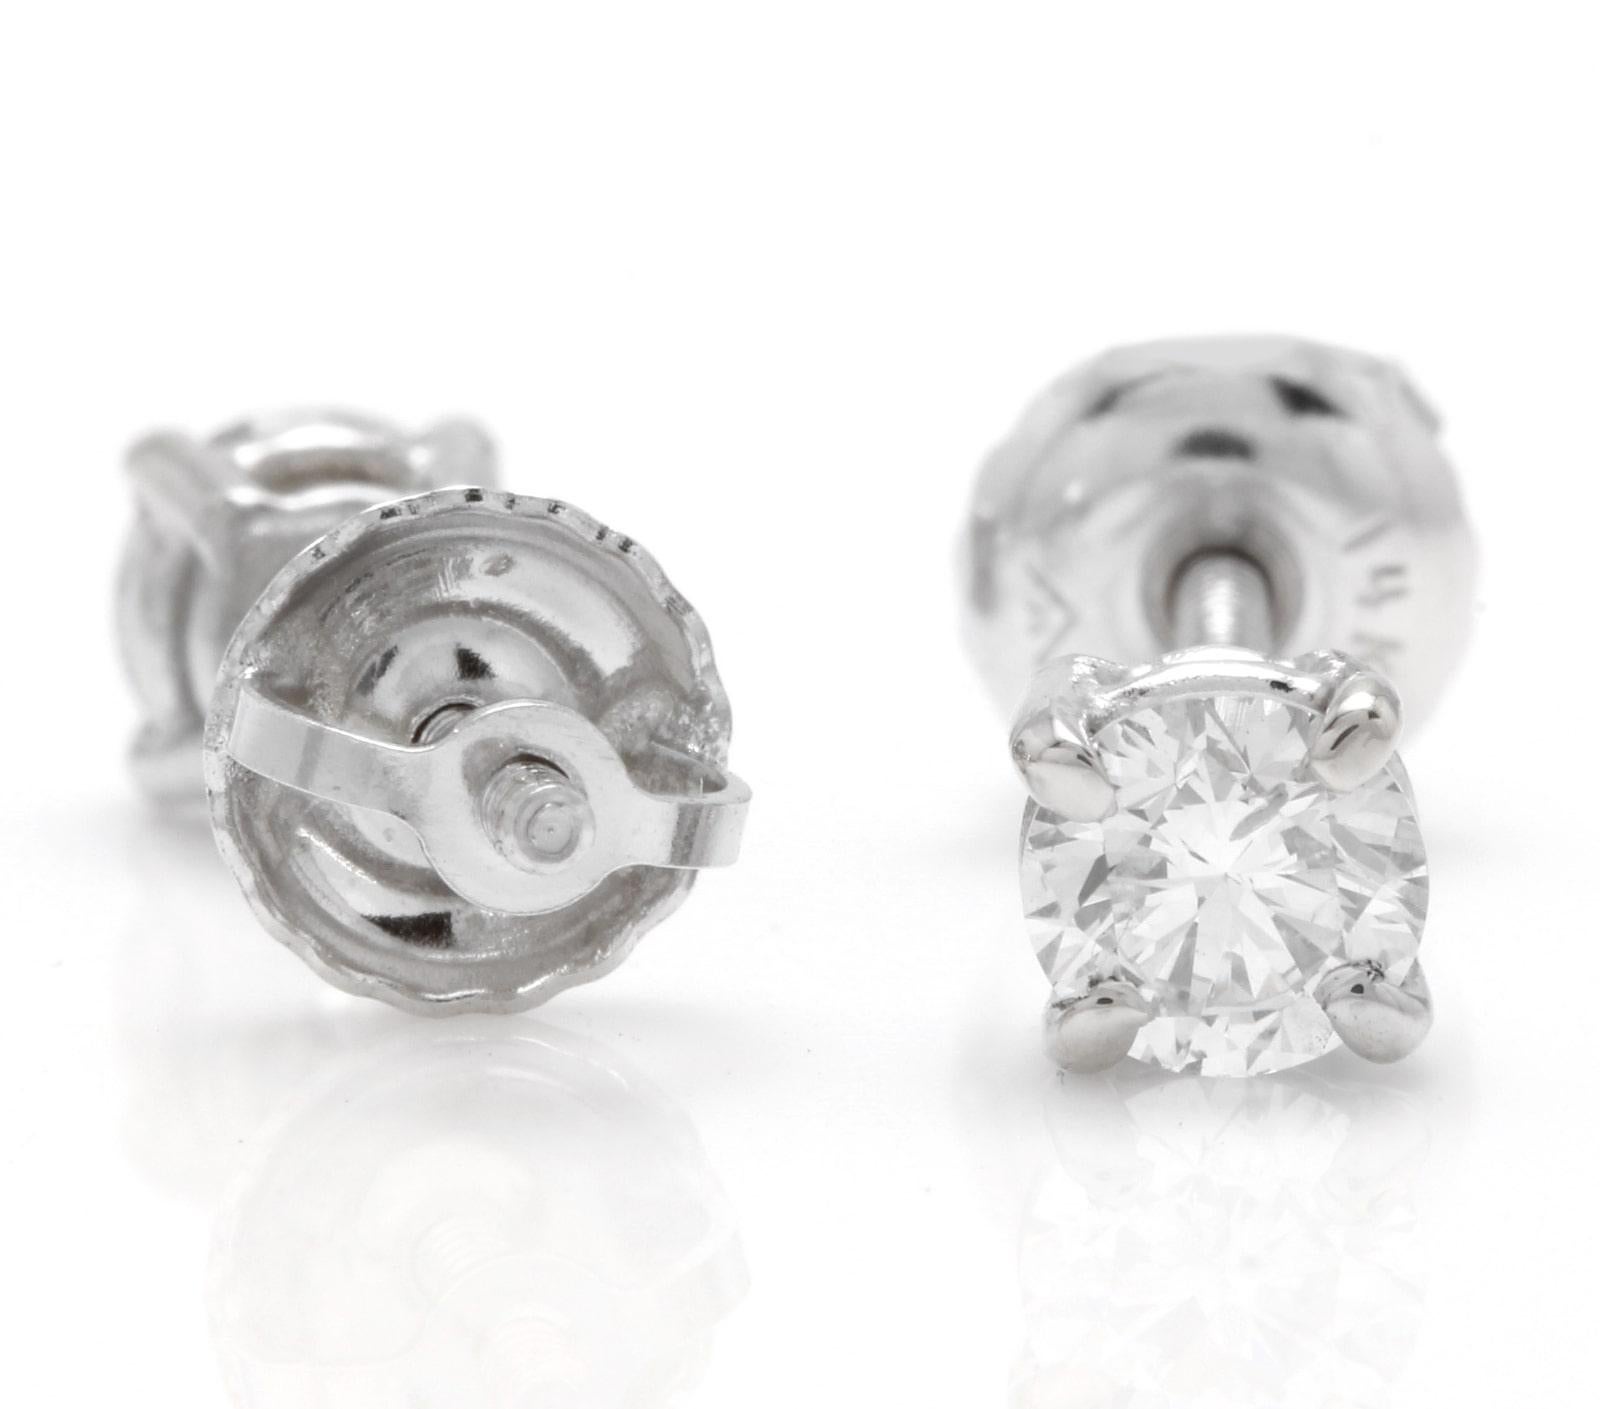 Exquisite 0.40 Carats Natural Diamond 14K Solid White Gold Stud Earrings

Amazing looking piece!

Total Natural Round Cut Diamonds Weight: 0.40 Carats (both earrings) VS2-S1 / G-H

Diamond Measures: Approx. 3.8mm

Total Earrings Weight is: 1.1